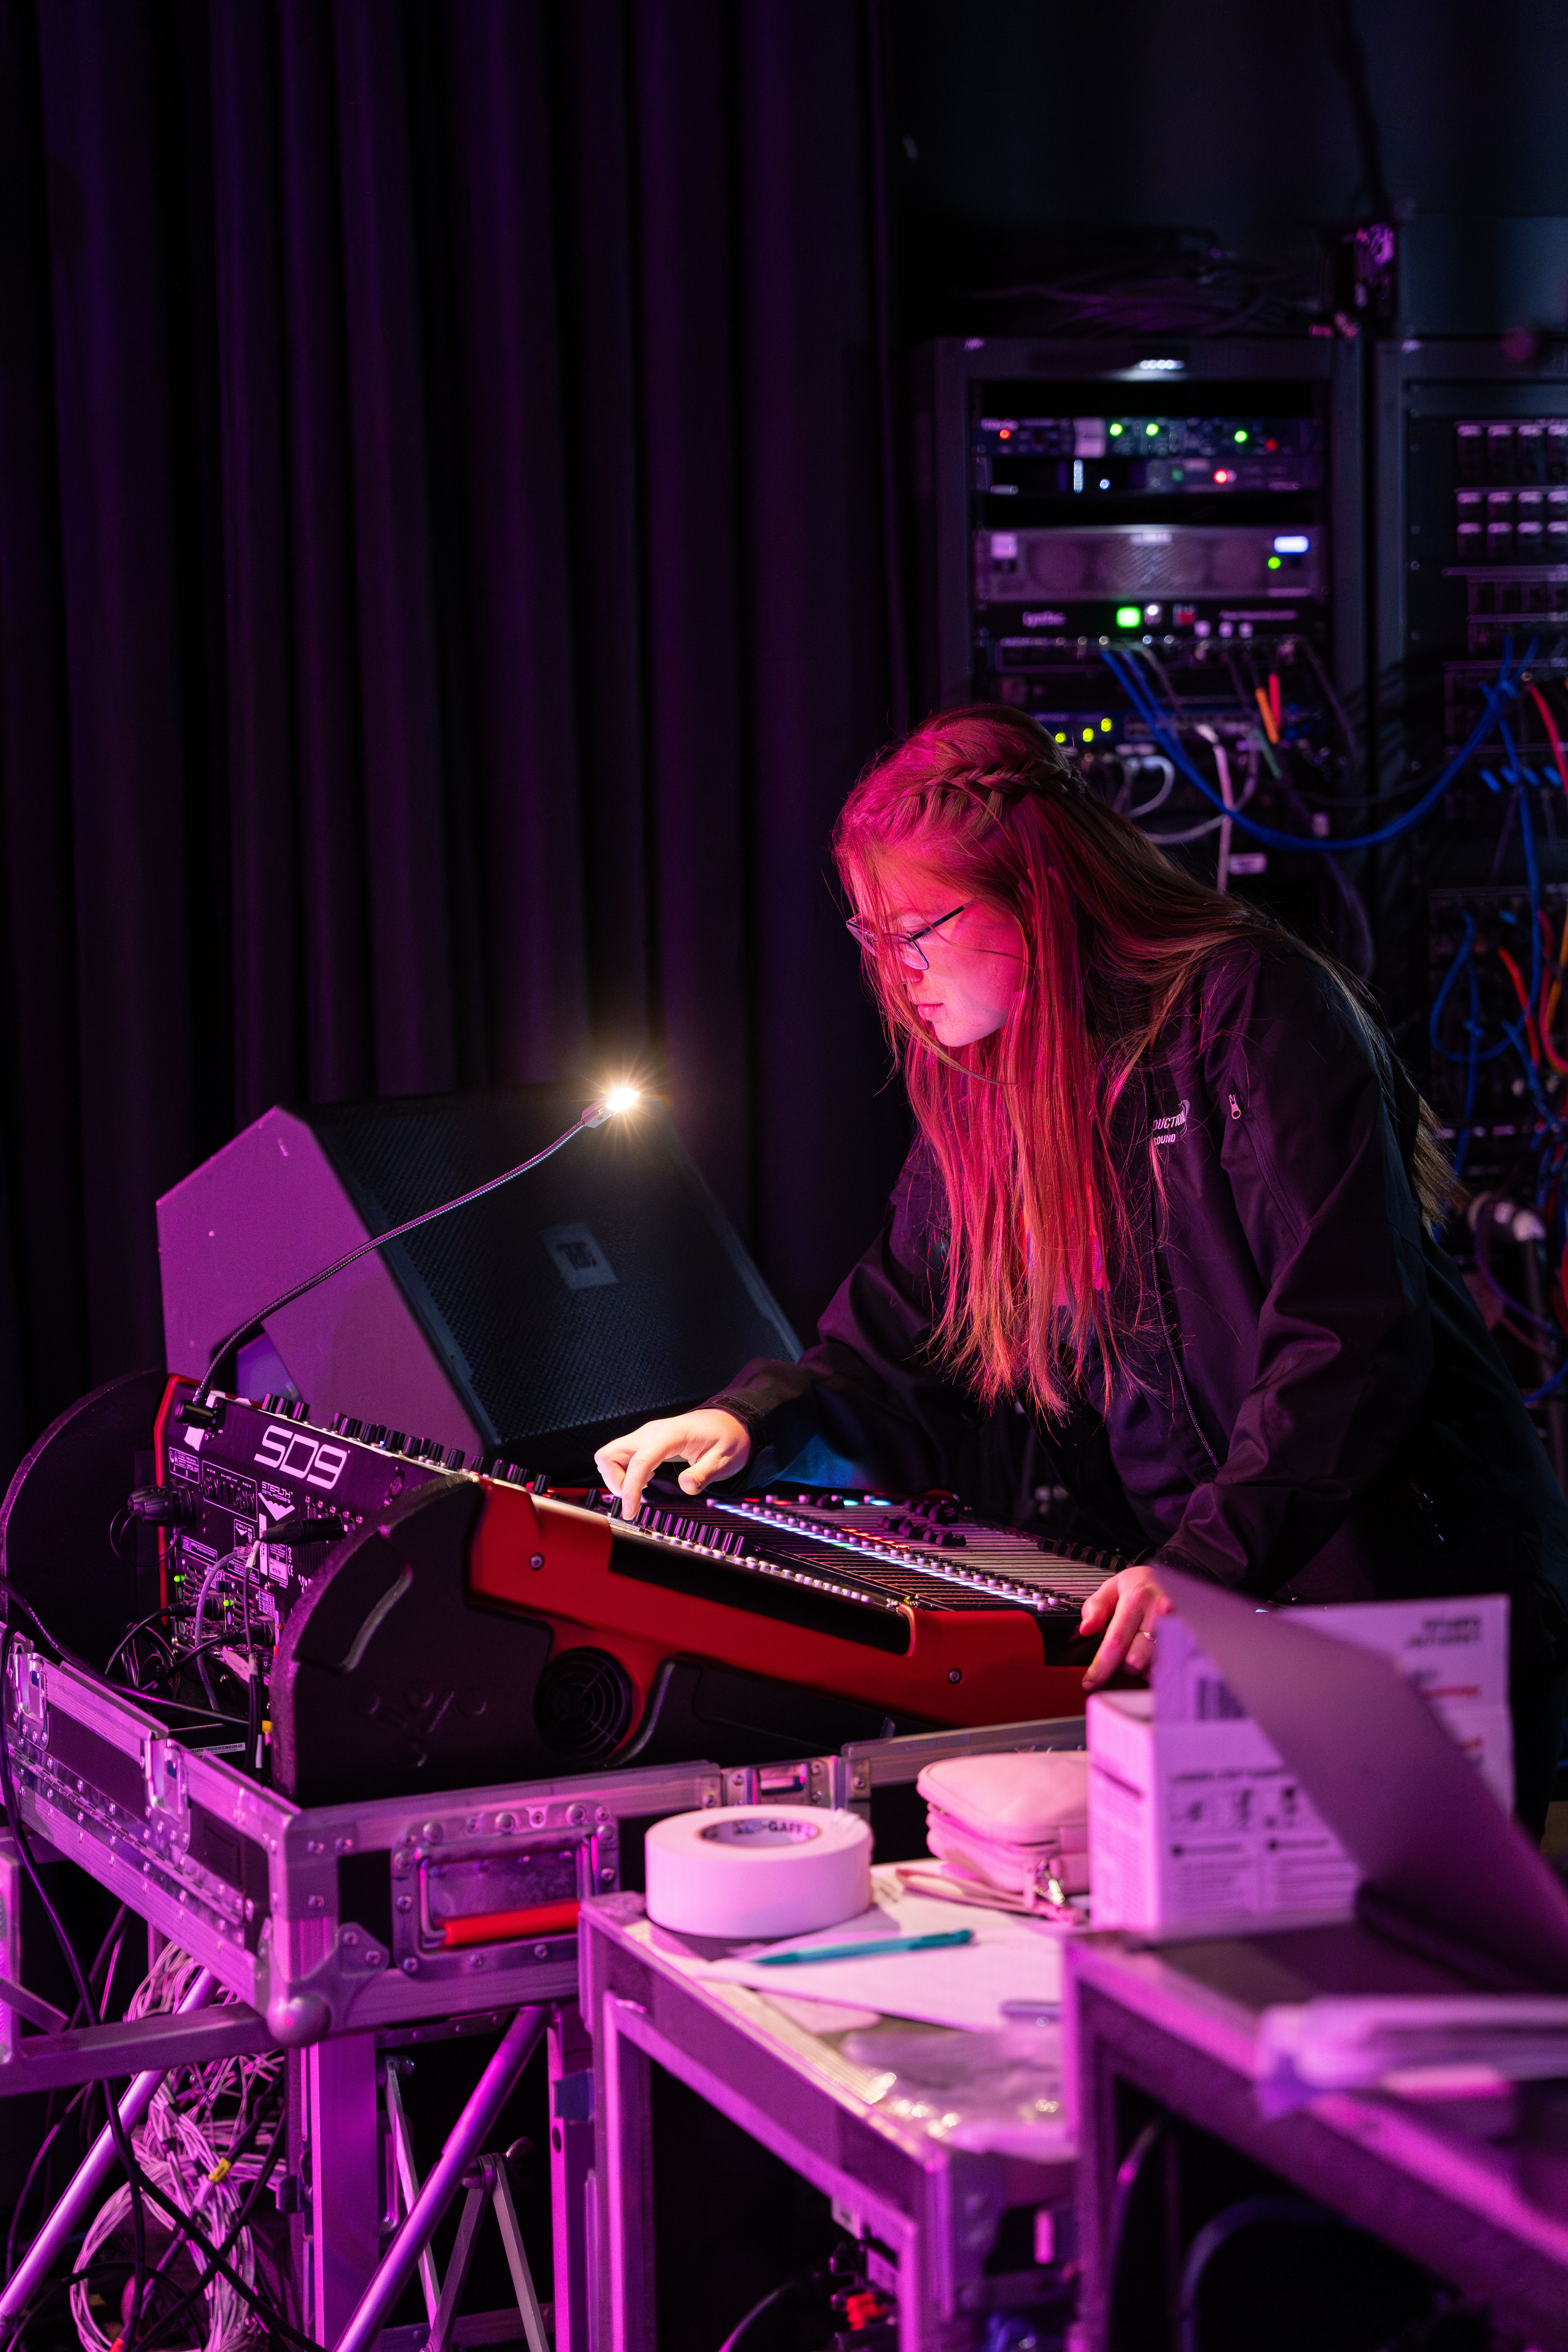 A New England School of Communications graduate works at a concert as a live sounds technician